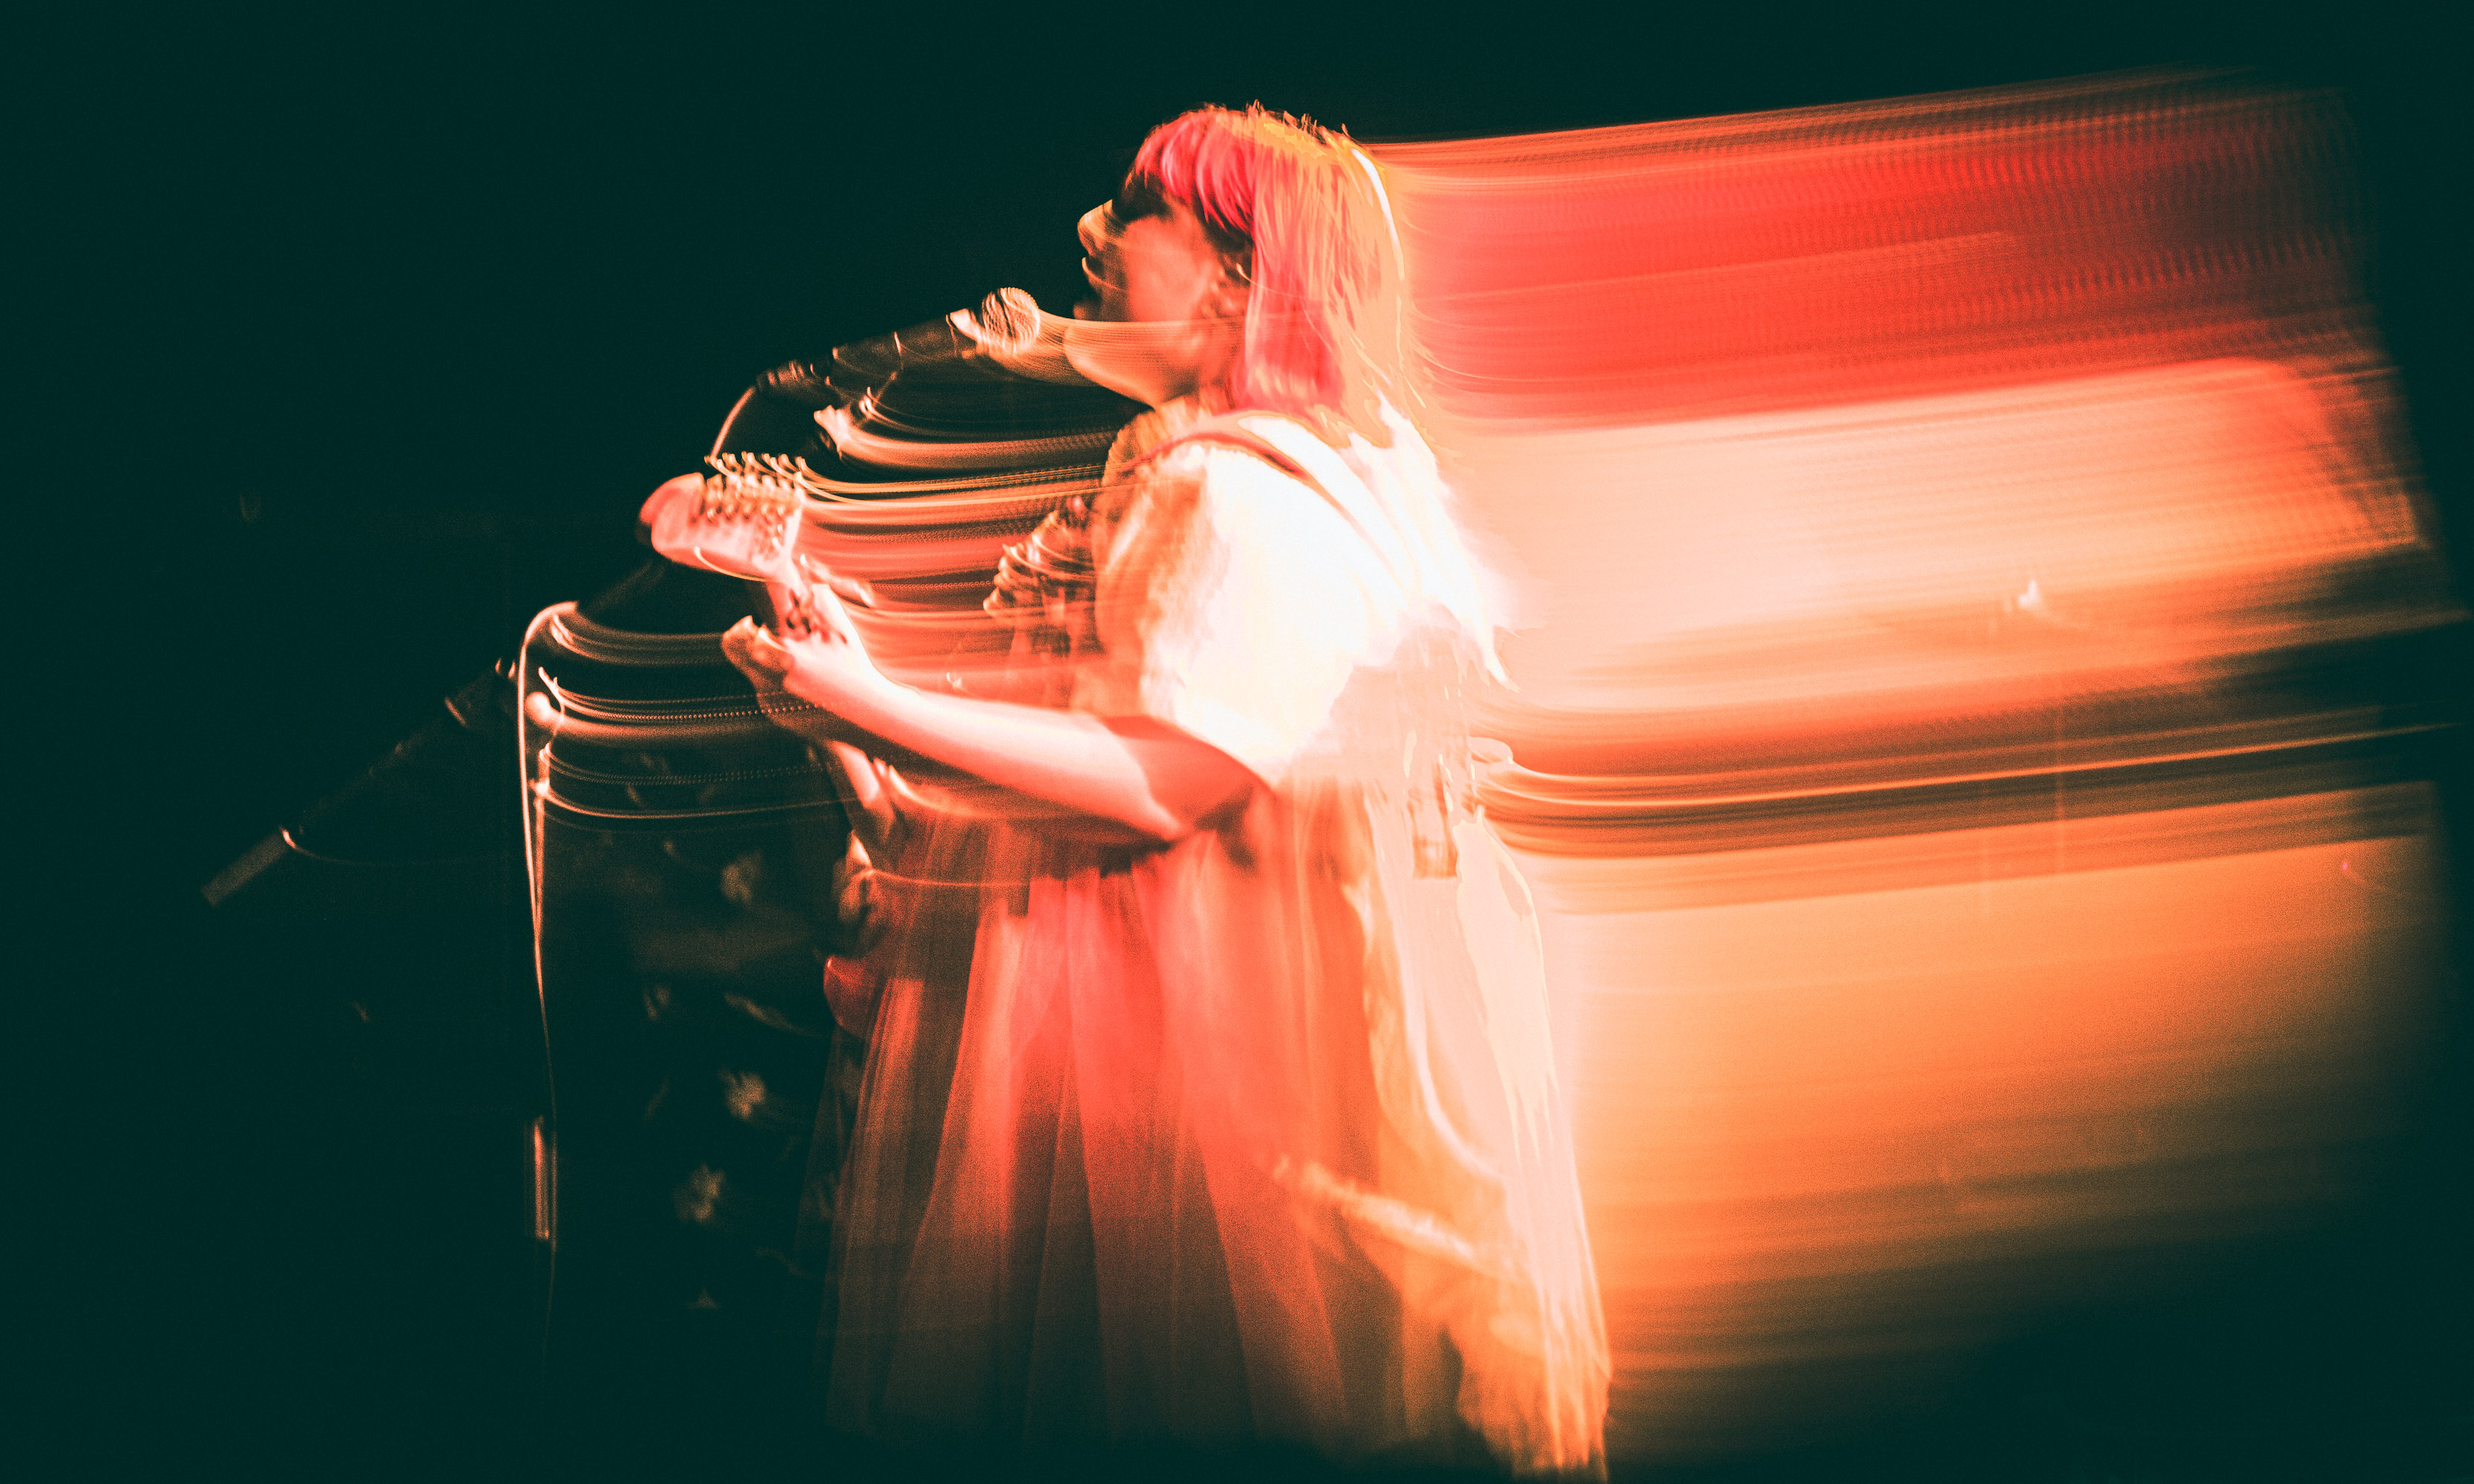 ANNIE DIRUSSO’S INTIMATE, CAREER-DEFINING NIGHT AT MUSIC HALL OF WILLIAMSBURG